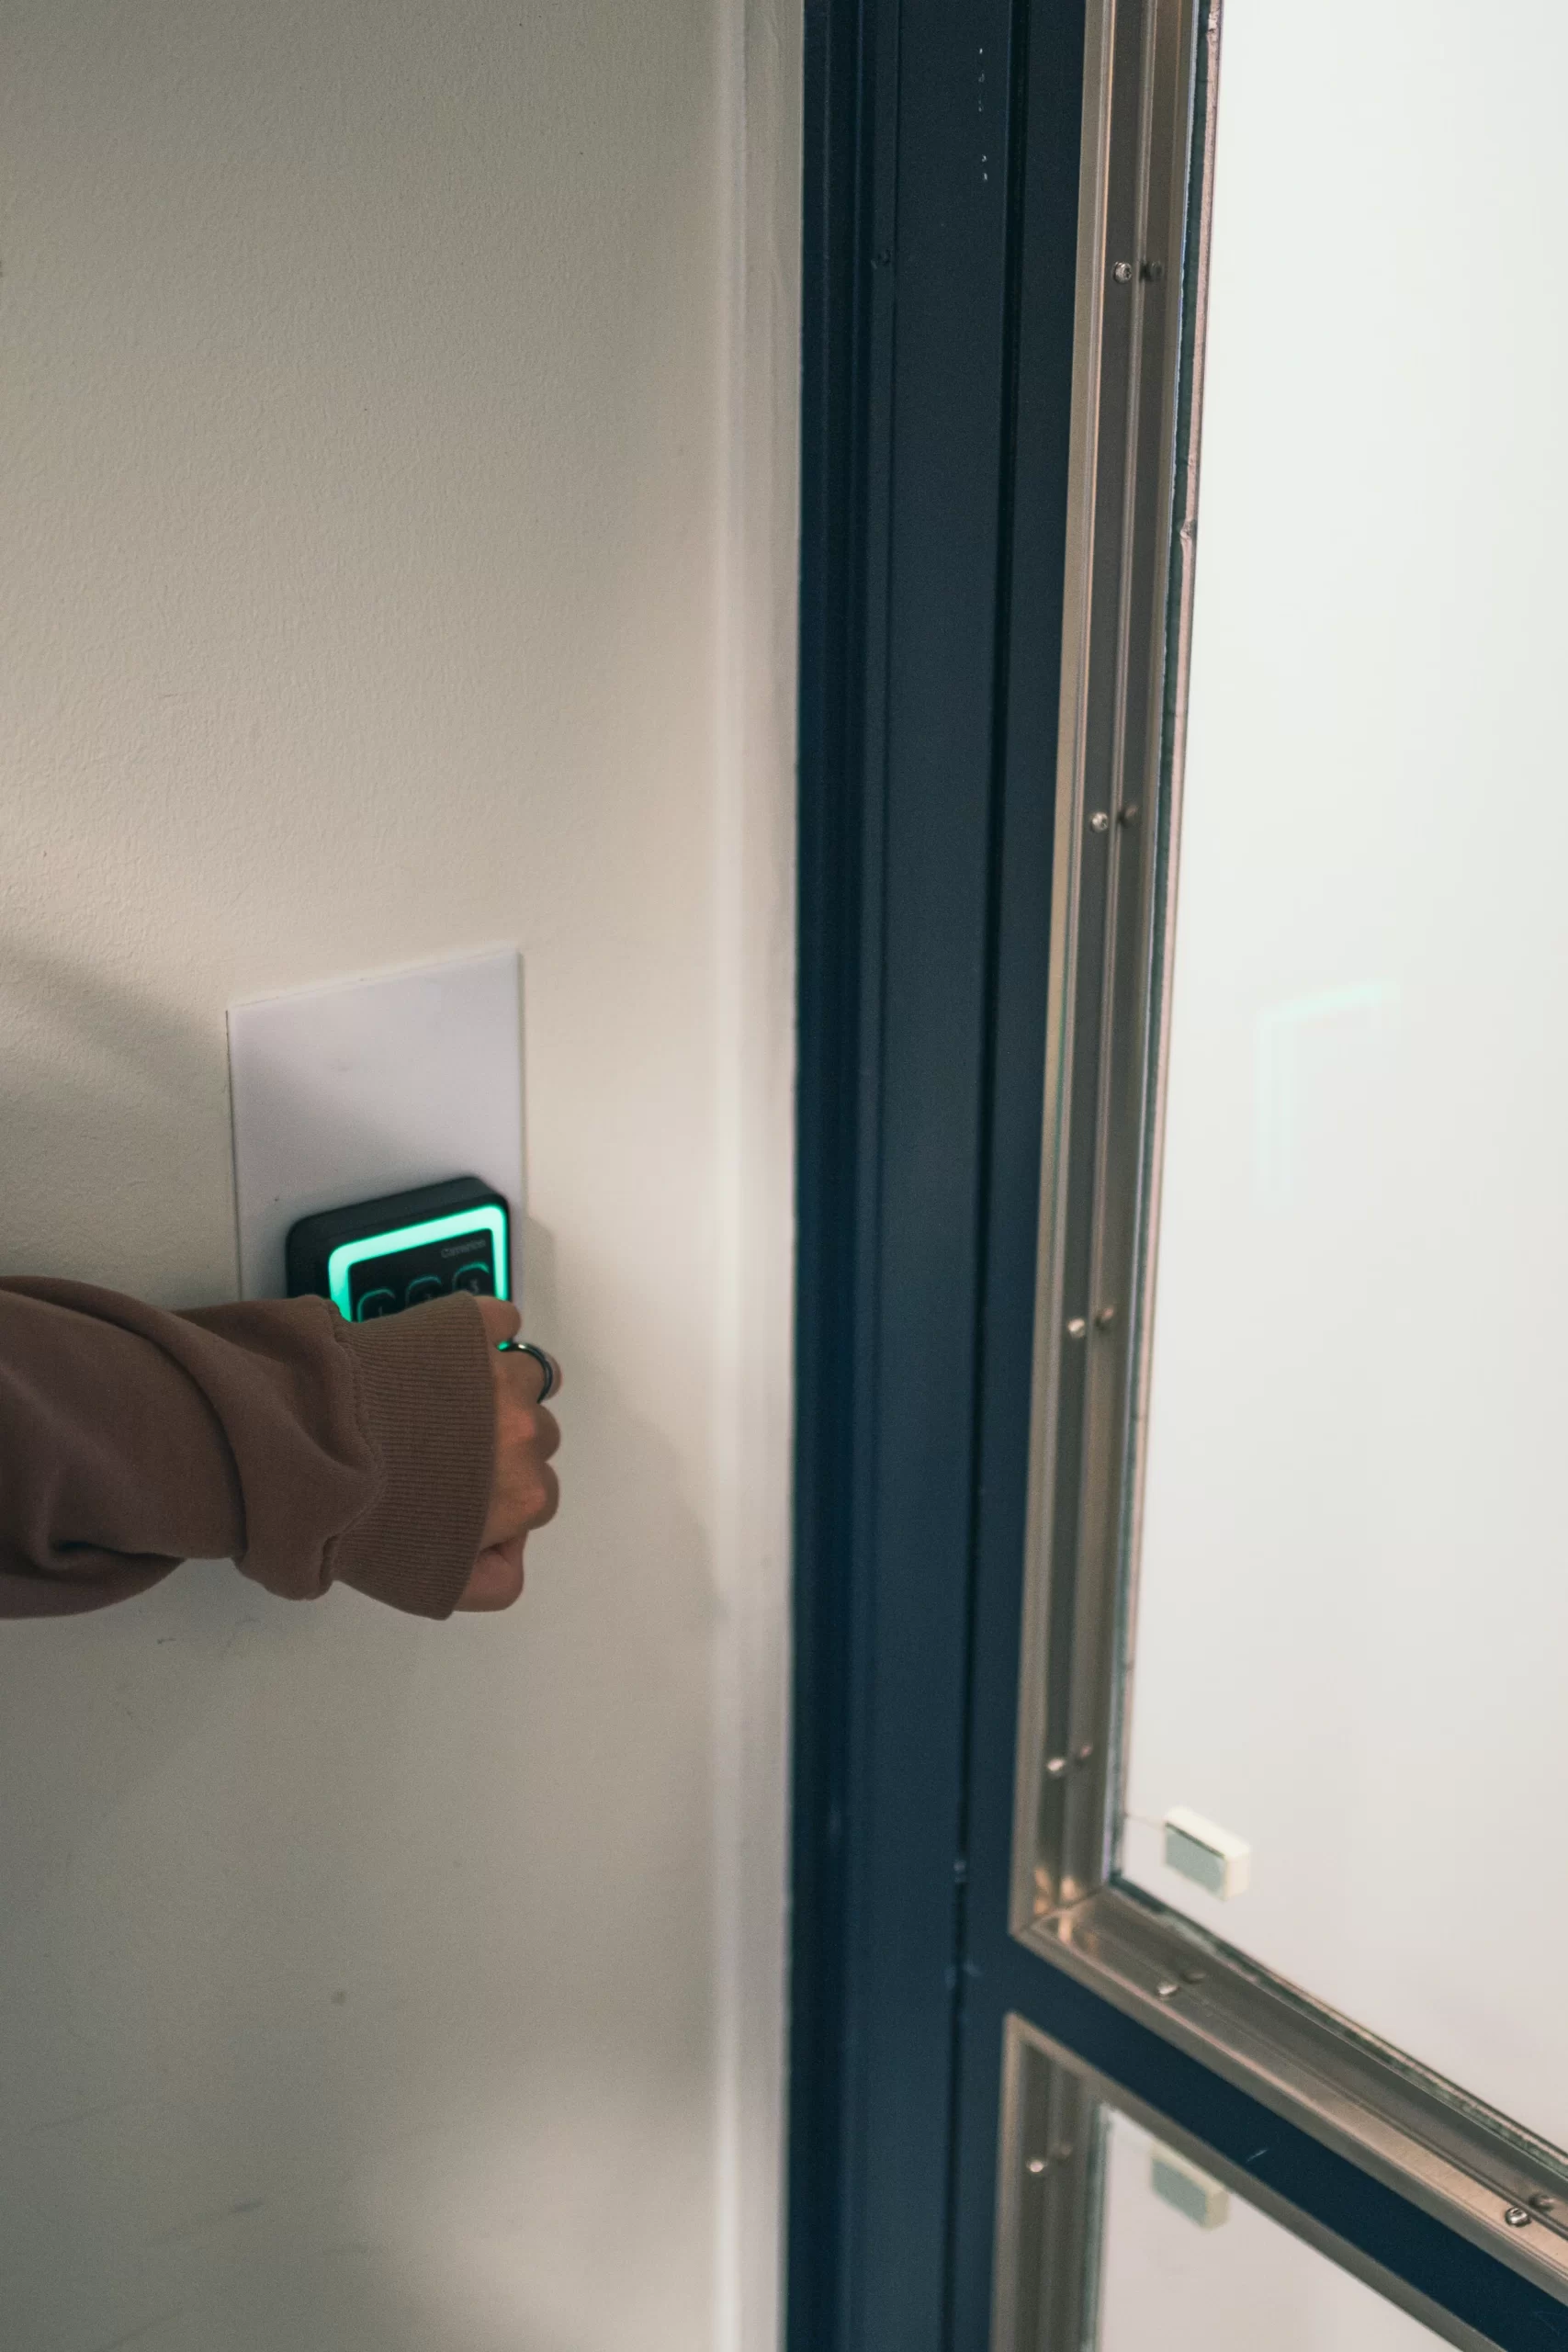 A woman's hand knocking on the access panel on the wall with a green light indicating access is granted